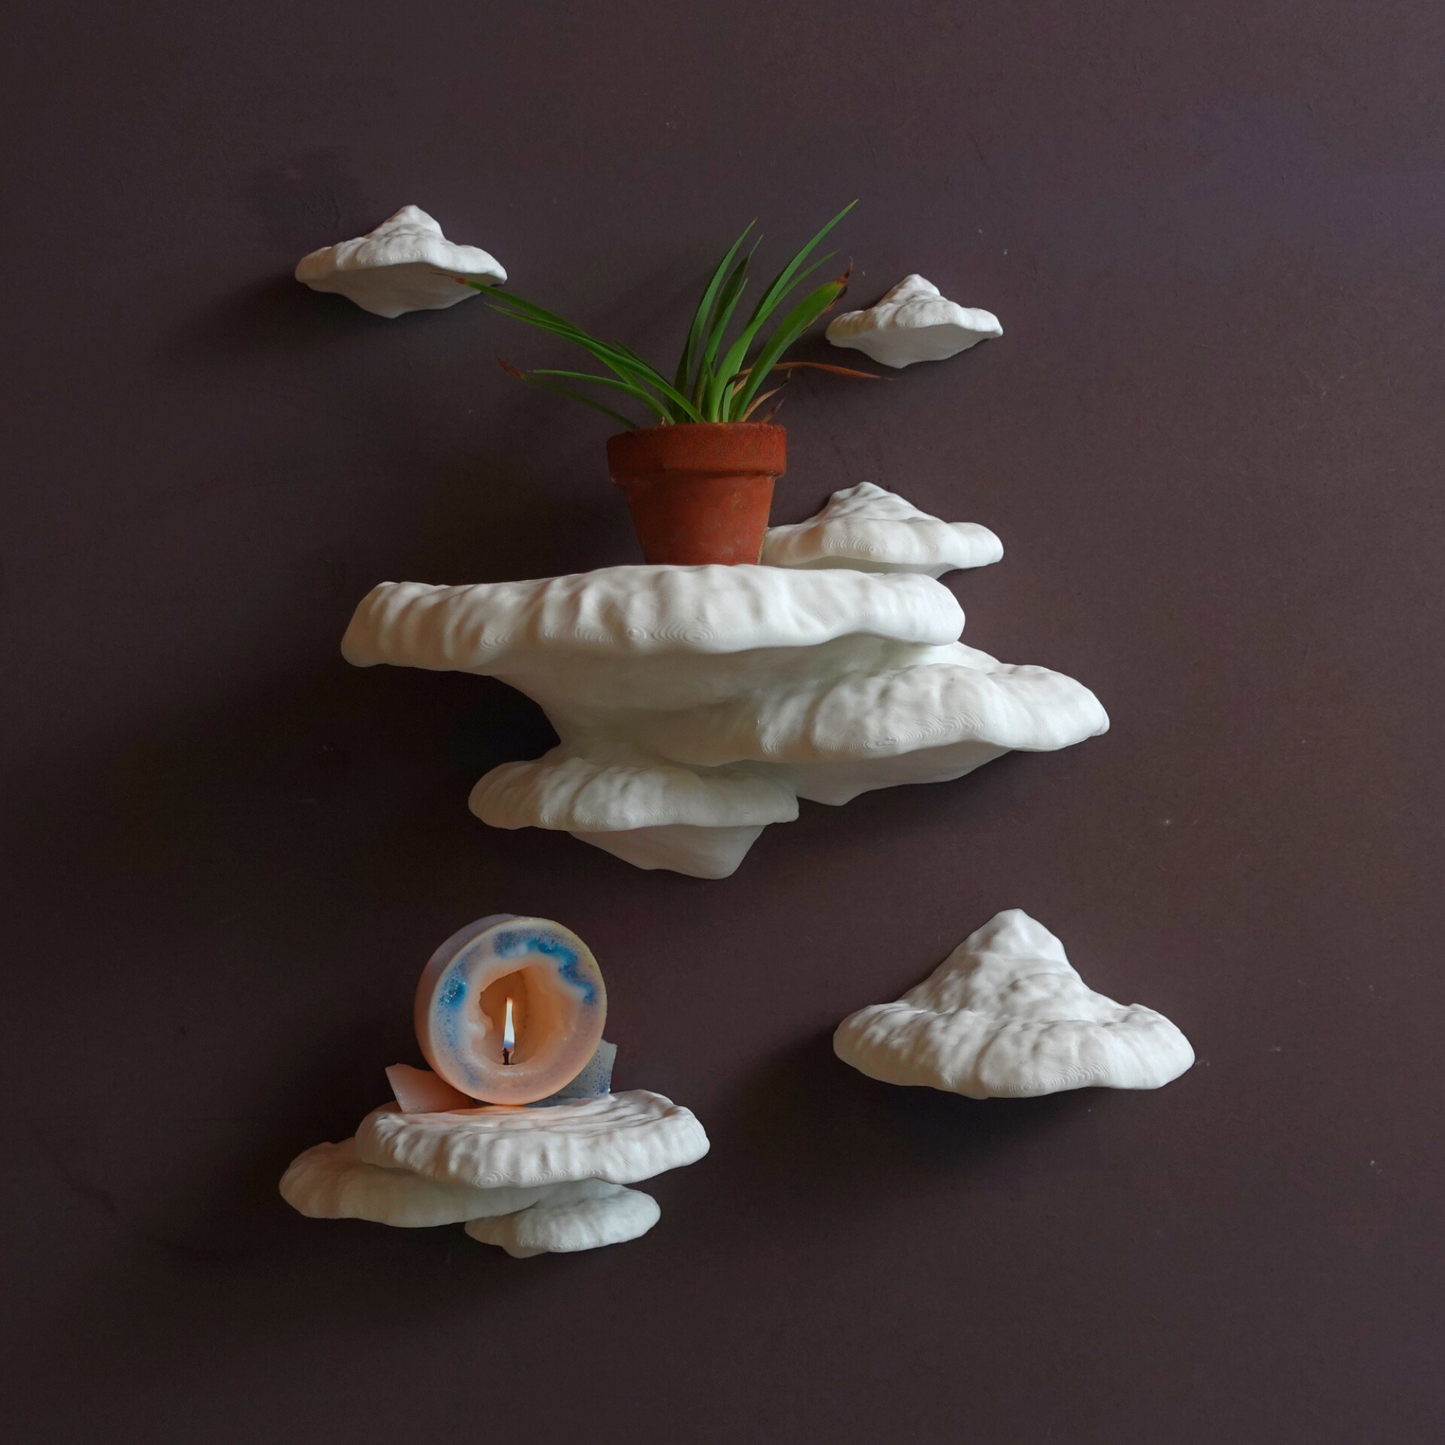 mushroom wall art shelves based on the pinicula mushroom fungi for a cottage or witch decor home